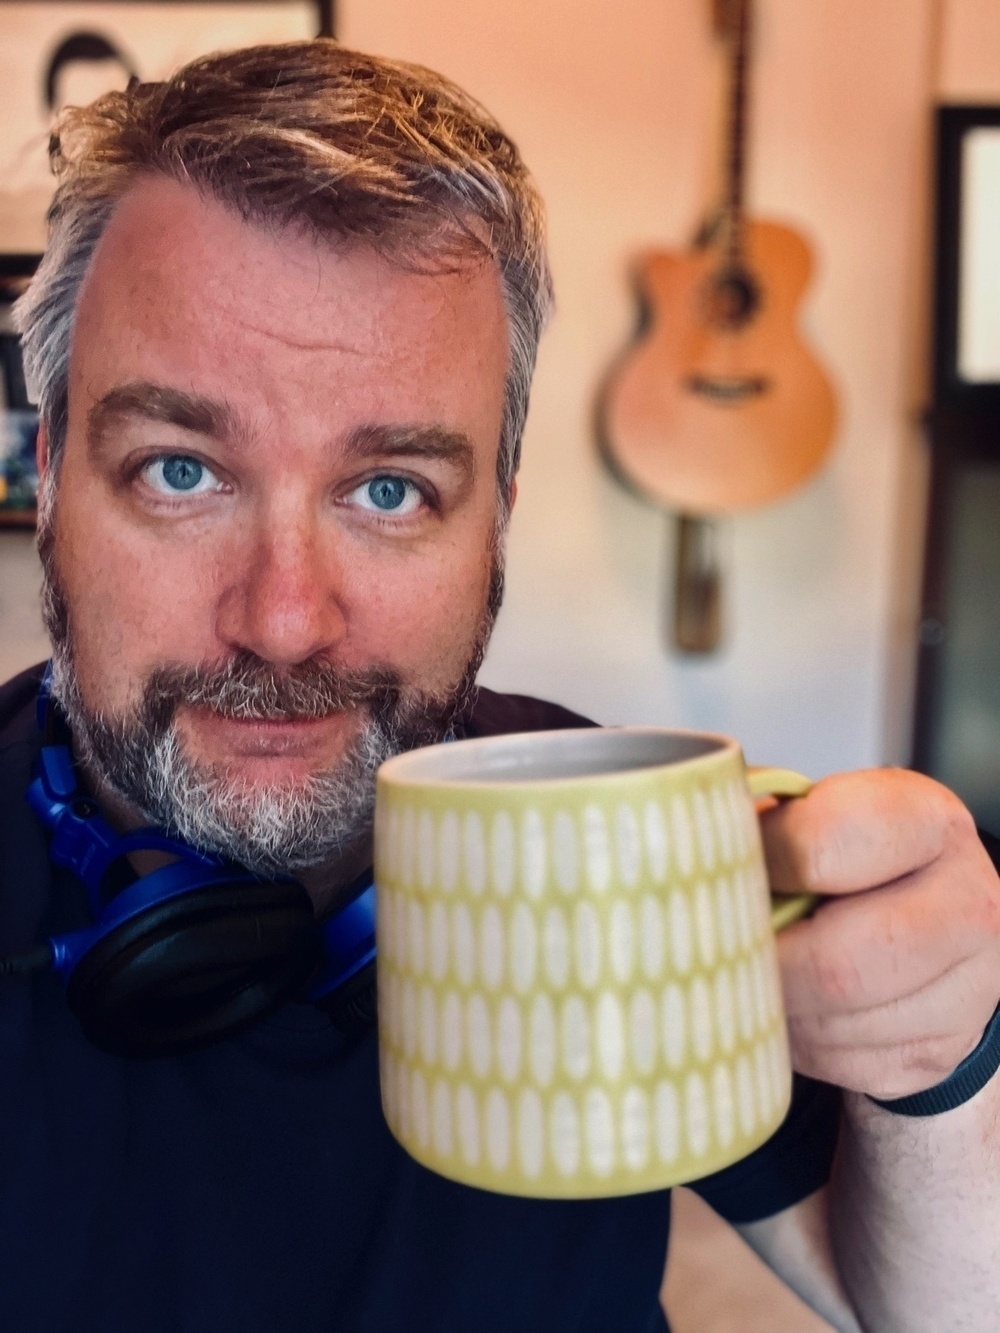 Chris holding a coffee mug and smiling at the camera.